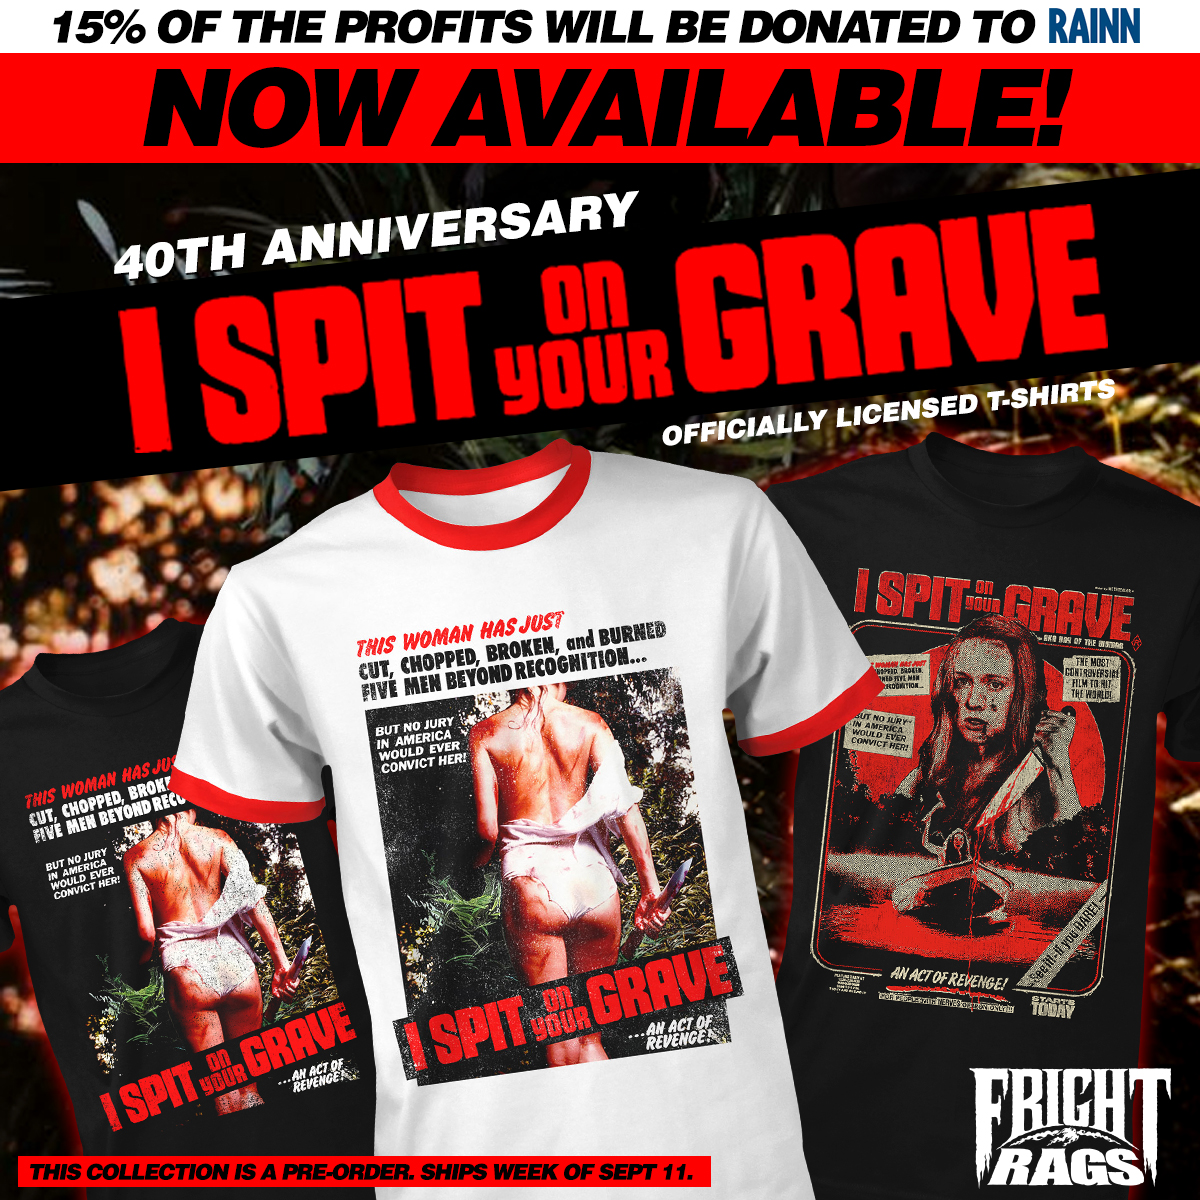 NOW AVAILABLE! Officially Licensed I SPIT ON YOUR GRAVE 40th Anniversary T-Shirts! 15% of the profits from each tee will be donated to RAINN! Order yours NOW! (Note: Tees are pre-order. Ships week of Sept 11) SHOP HERE: bit.ly/2PExzYO #frightrags #ispitonyourgrave #70s